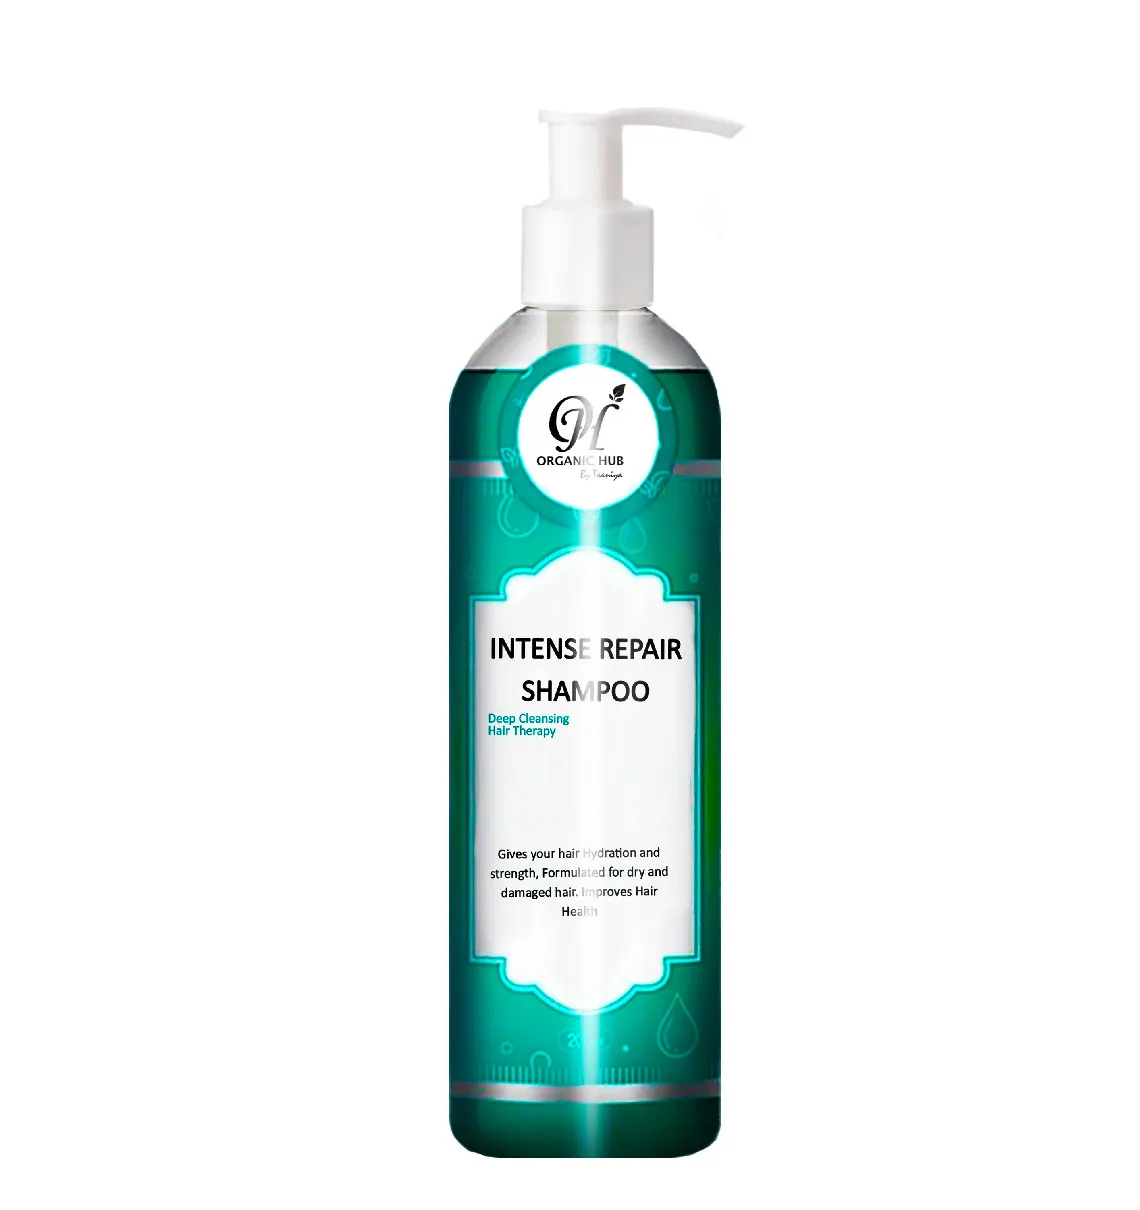 Best Shampoo and Conditioner for curly dry frizzy Hair in Pakistan buy COnatural Hair Shampoo. Hair Energy hair Shampoo in Pakistan, Hairenergy, Buy Best Loreal Shampoo, Tresmee Shampoo, Keratine Shampoo in Pakistan, Dove Shampoo Price in Pakistan